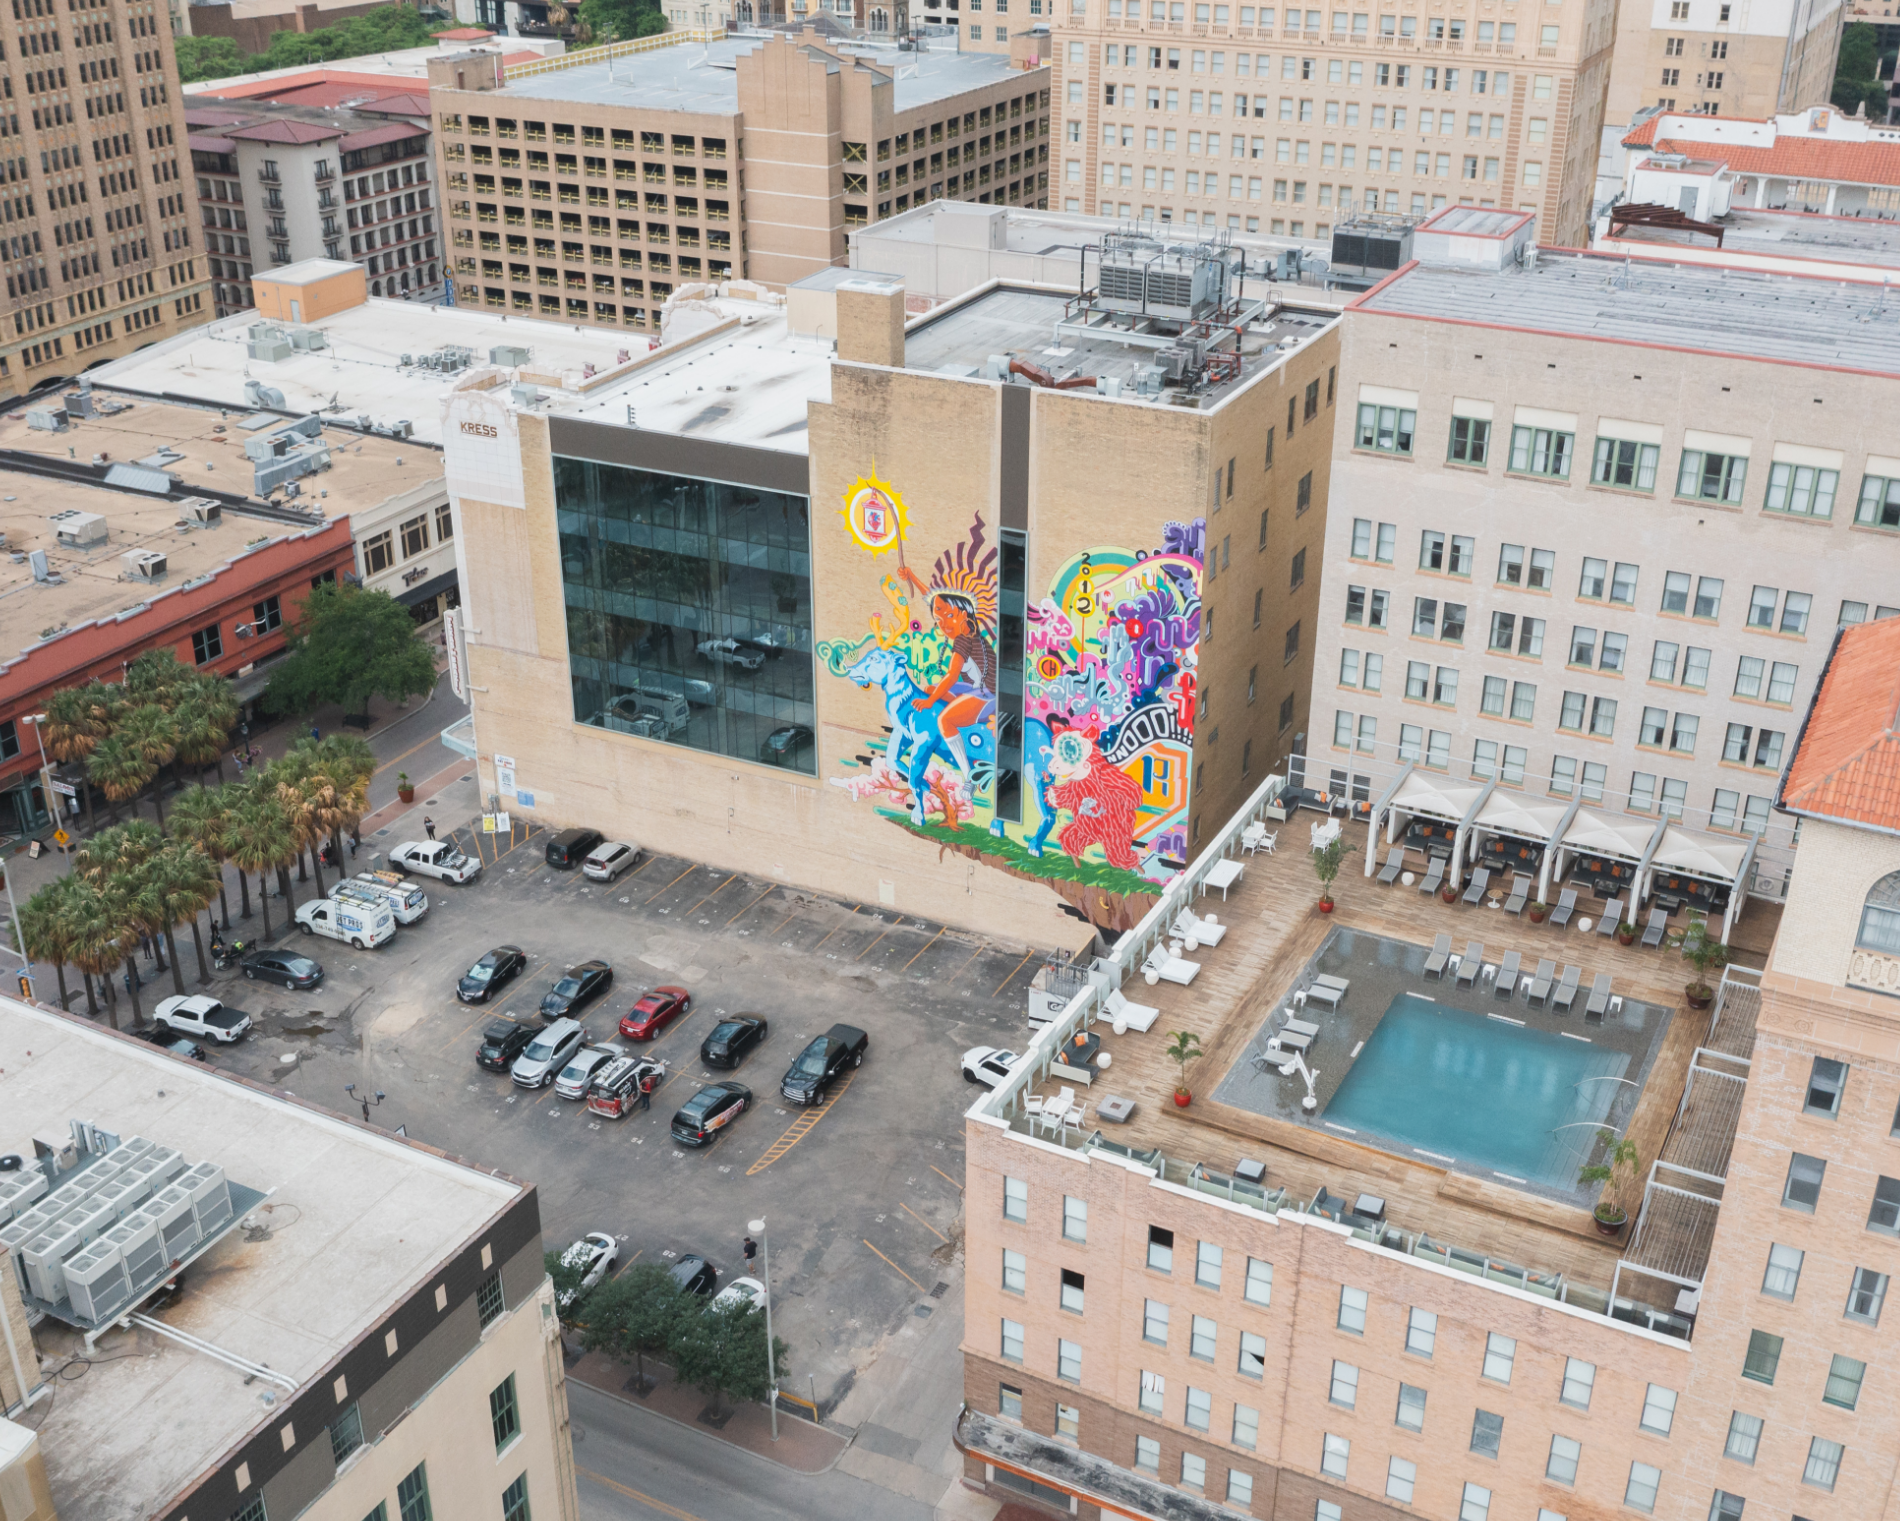 Down Town San Antonio showing Art on Side Of Build